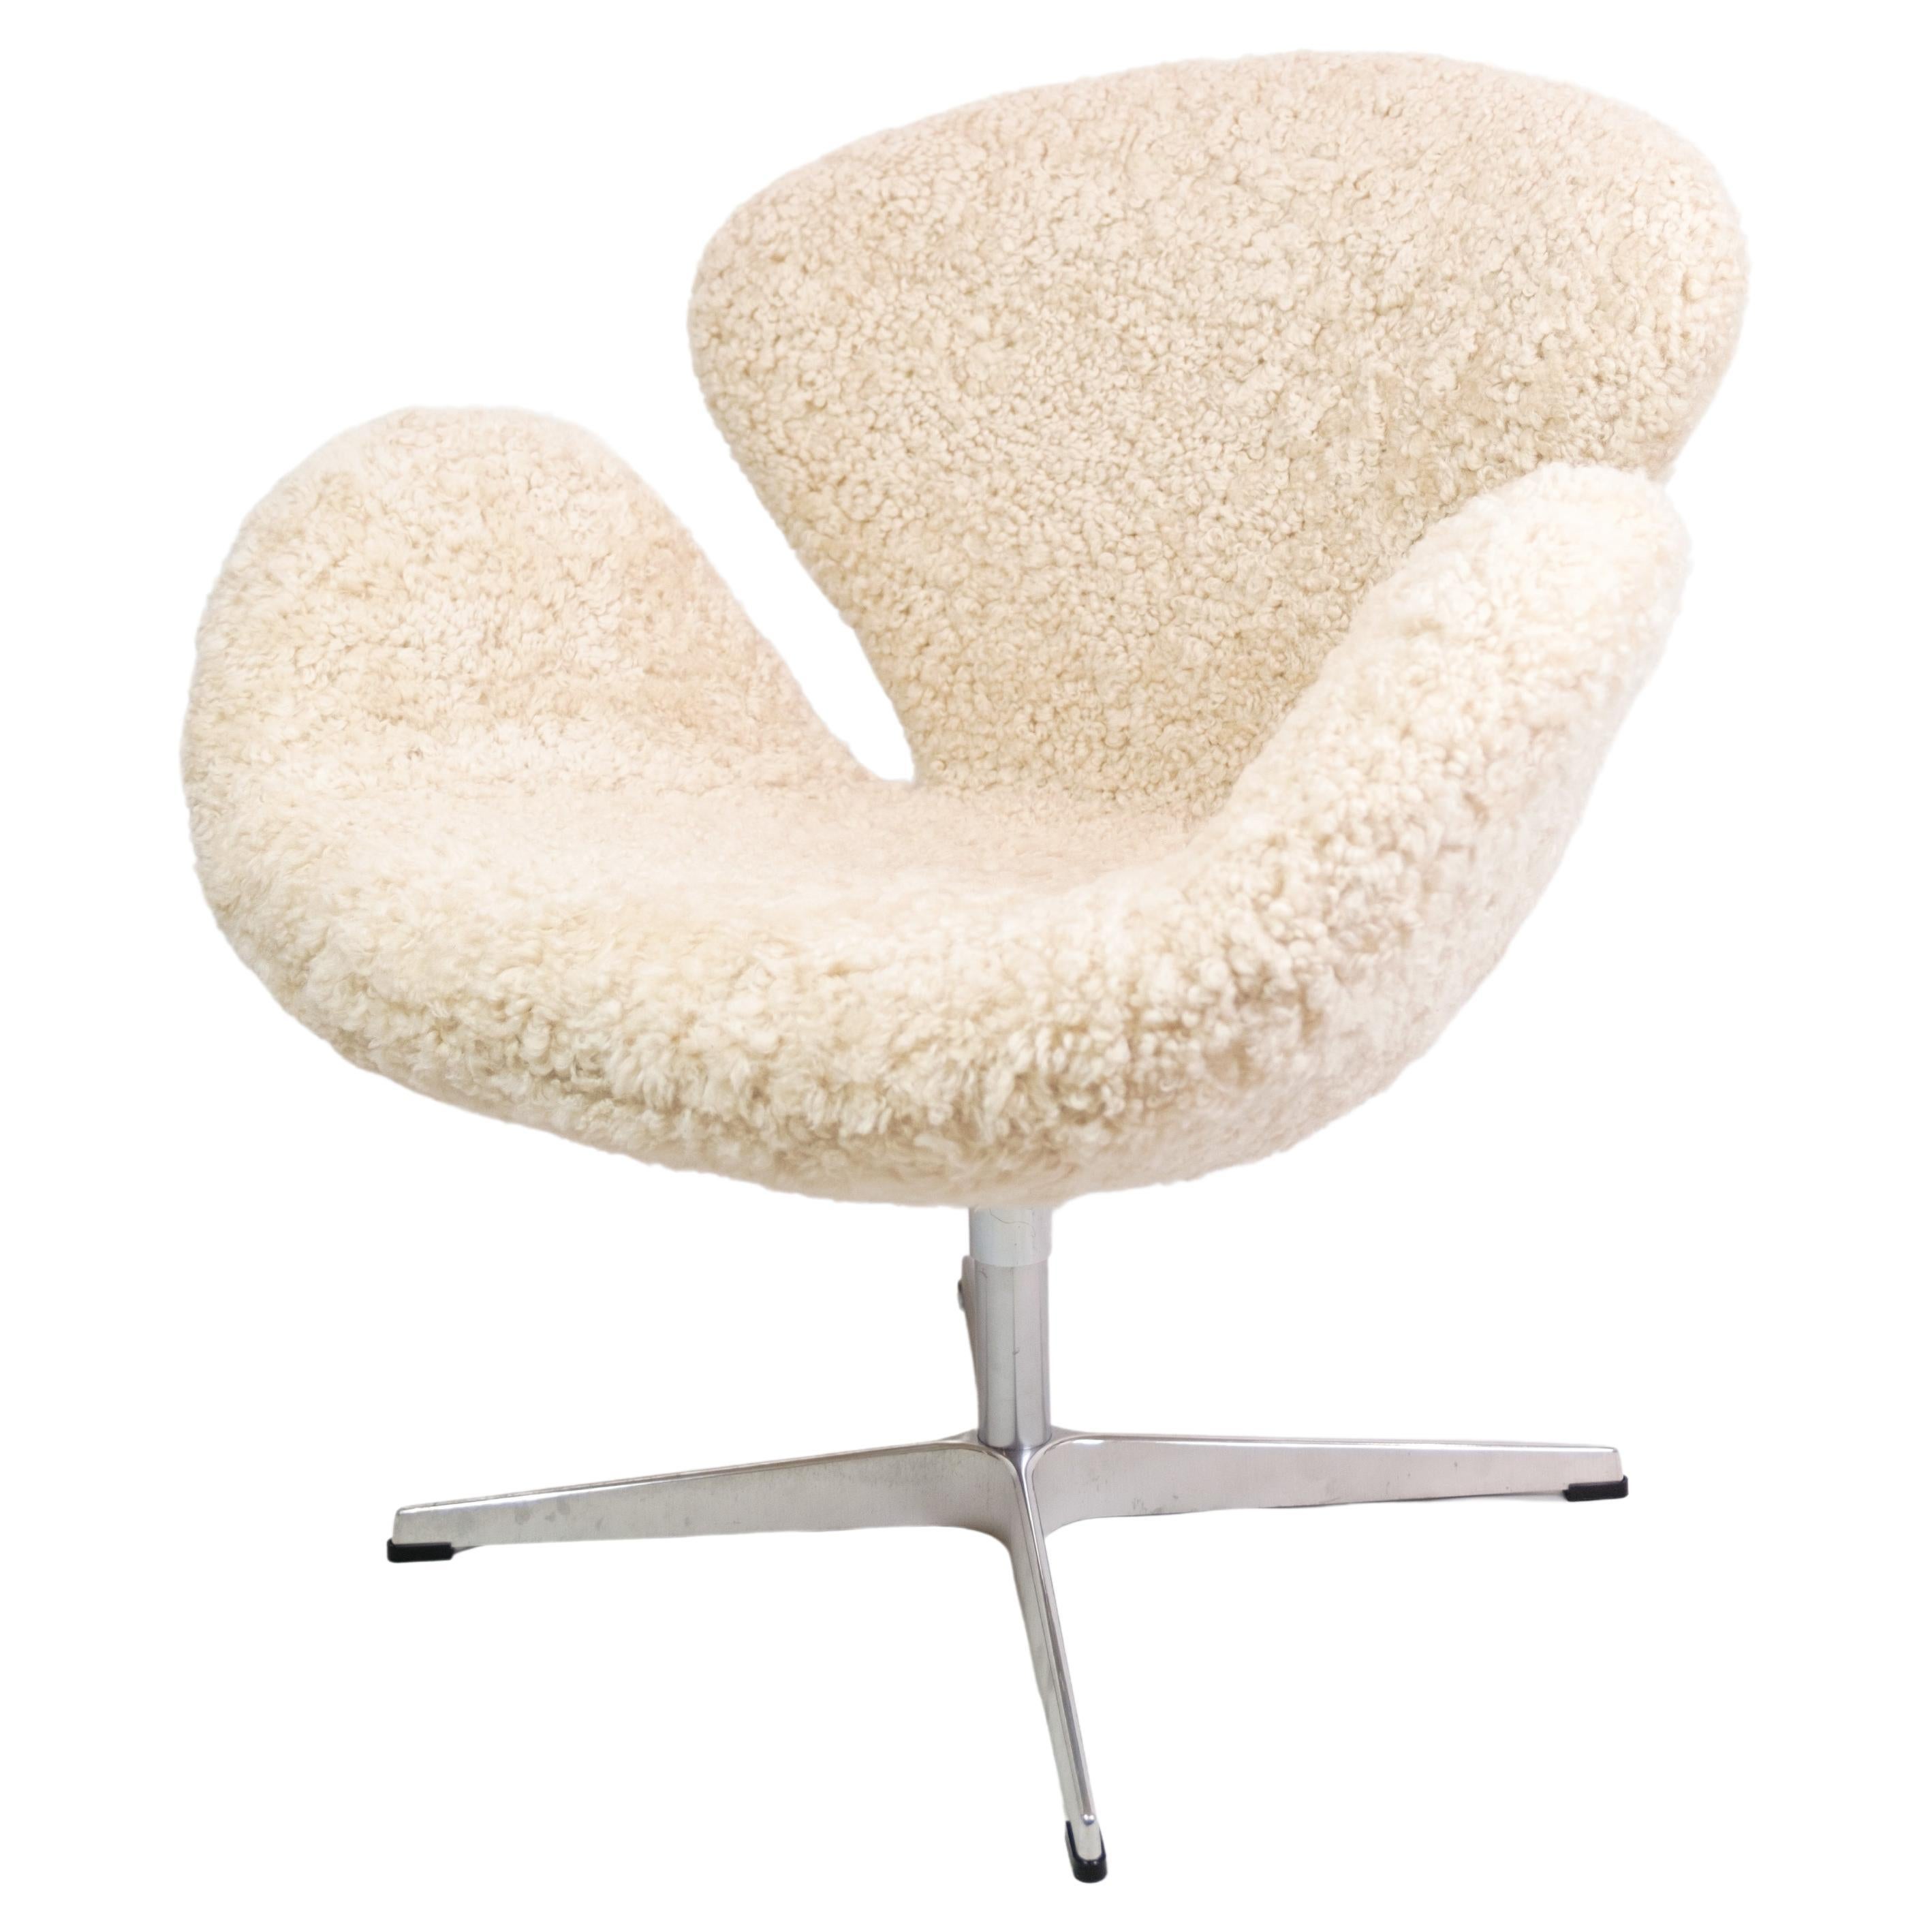 The Swan, Model 3320 Designed By Arne Jacobsen, Made By Fritz Hansen From 1958s For Sale